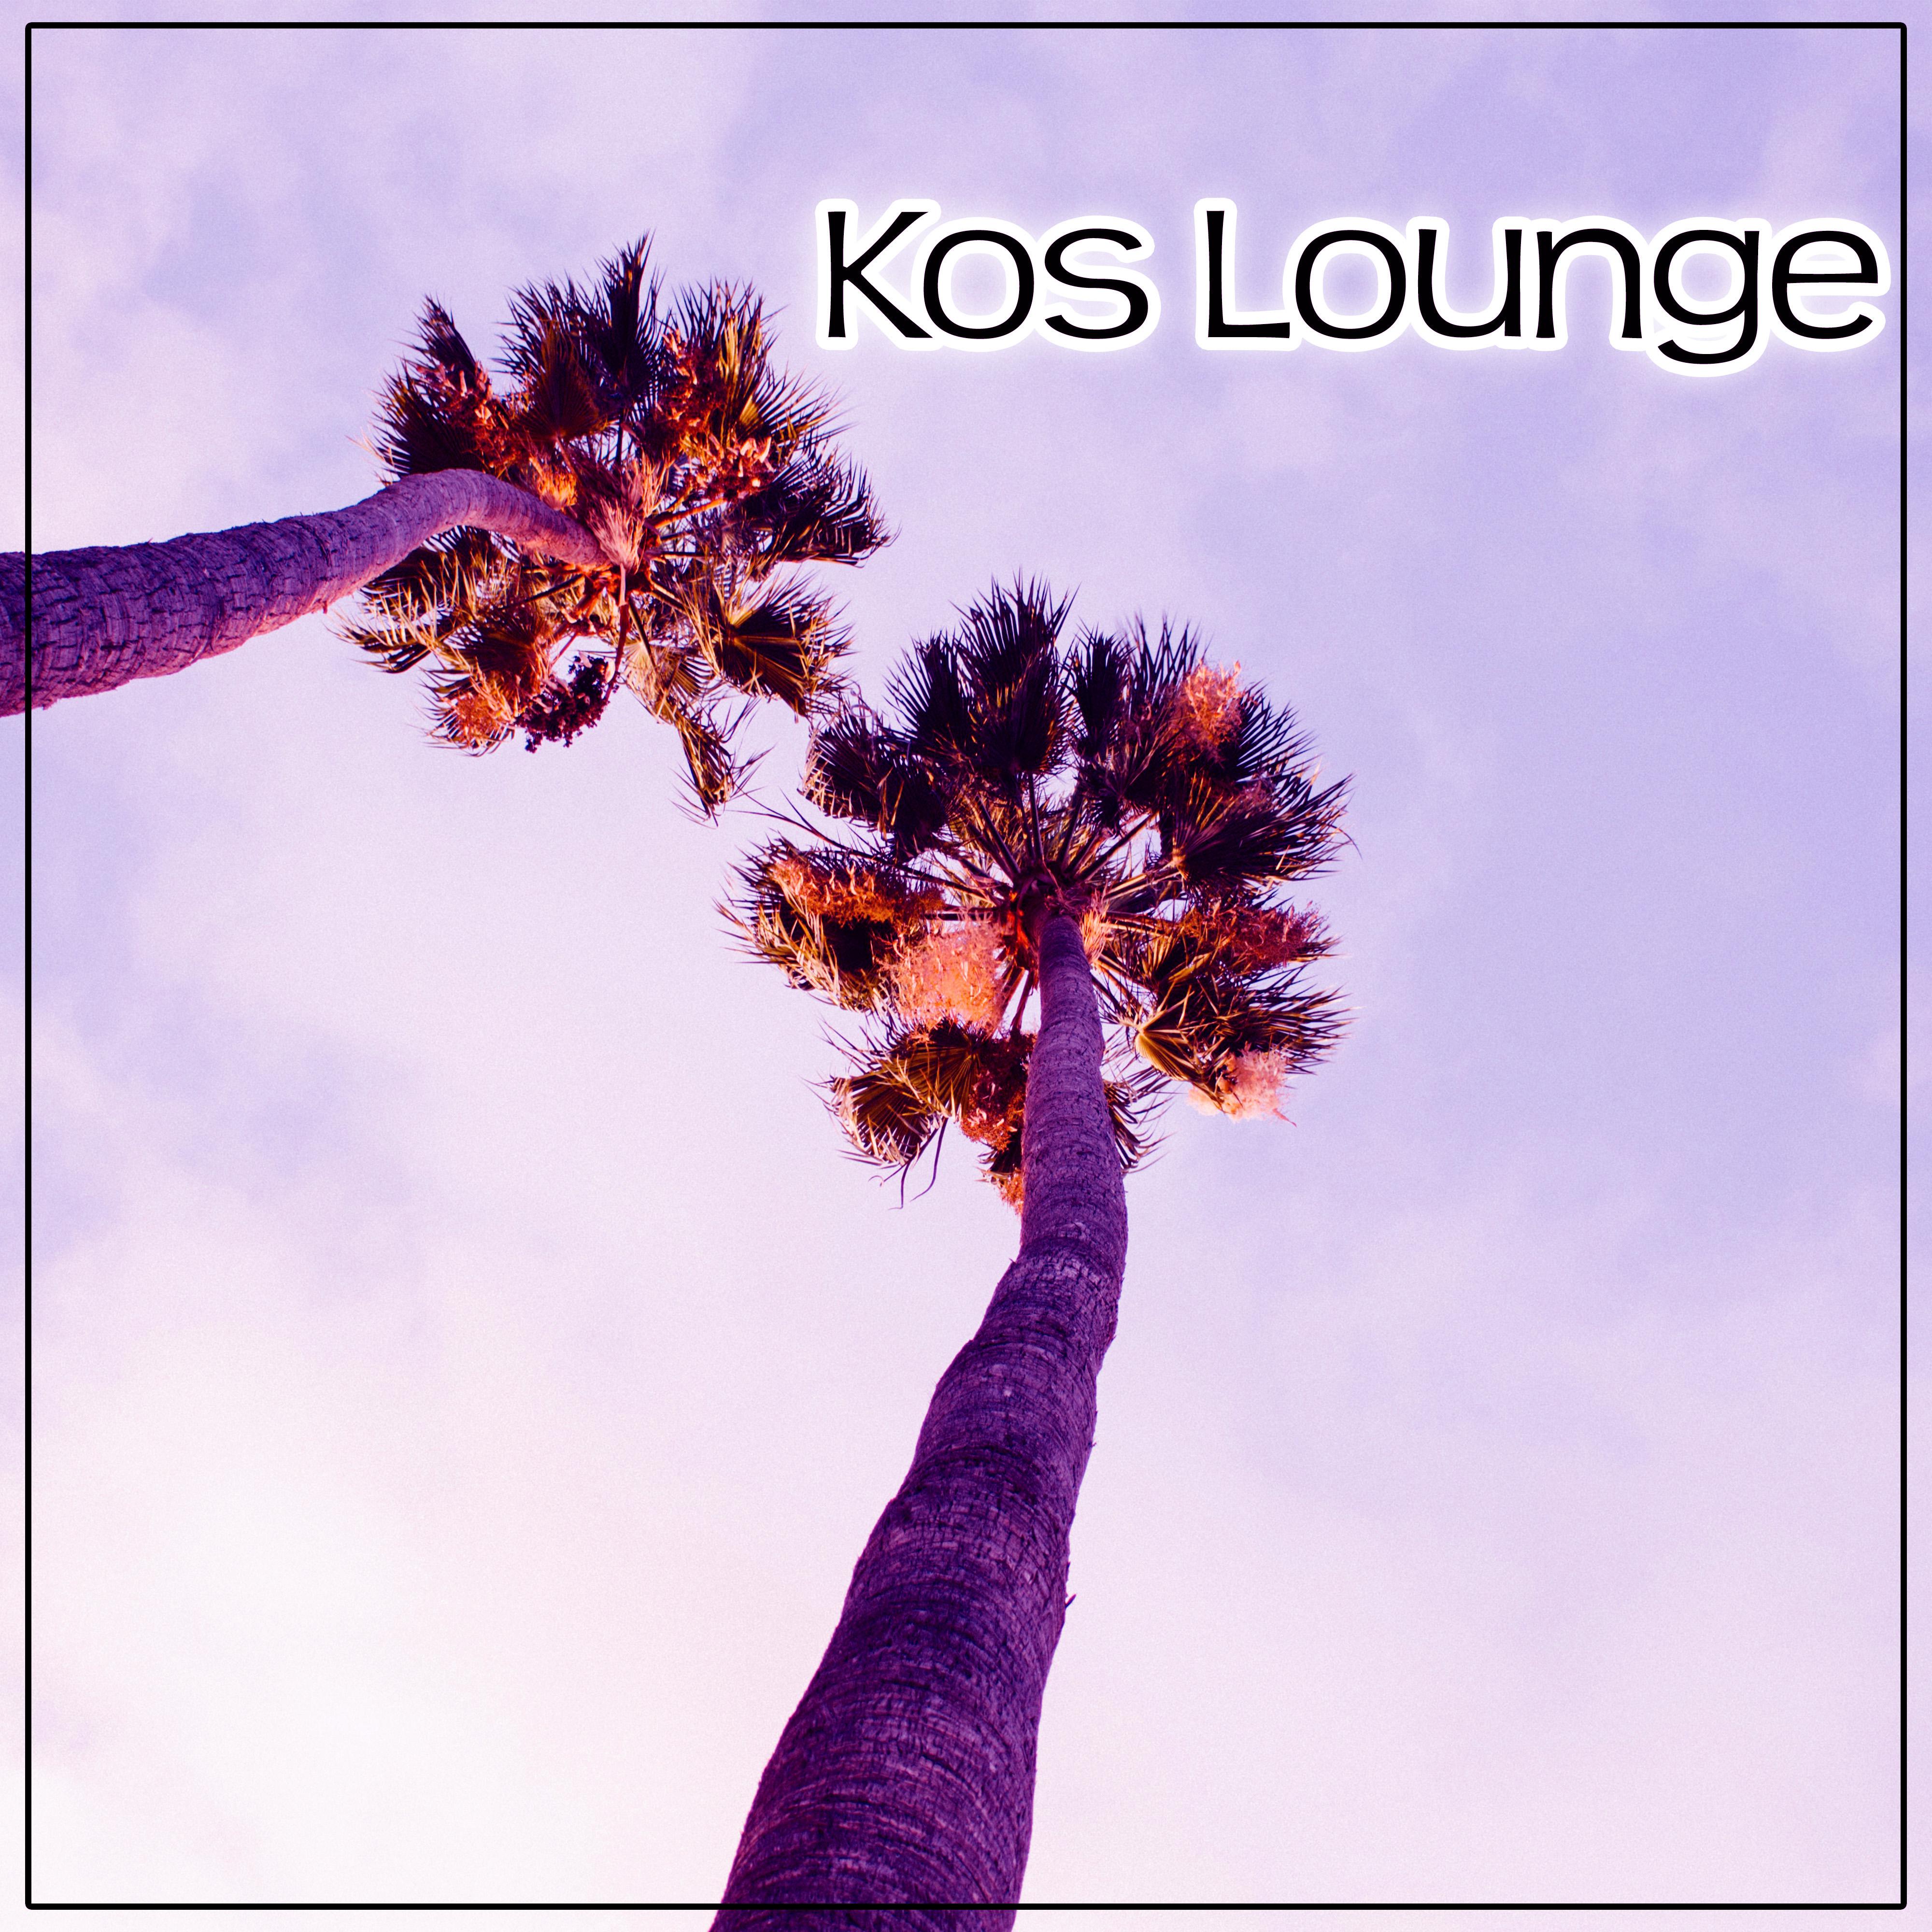 Kos Lounge - Chillout Lounge,  Summer Vibes, Positive Tones of Chill Out Music, Relaxing Music, Ibiza Chill, Beach Music, Chill Out Music